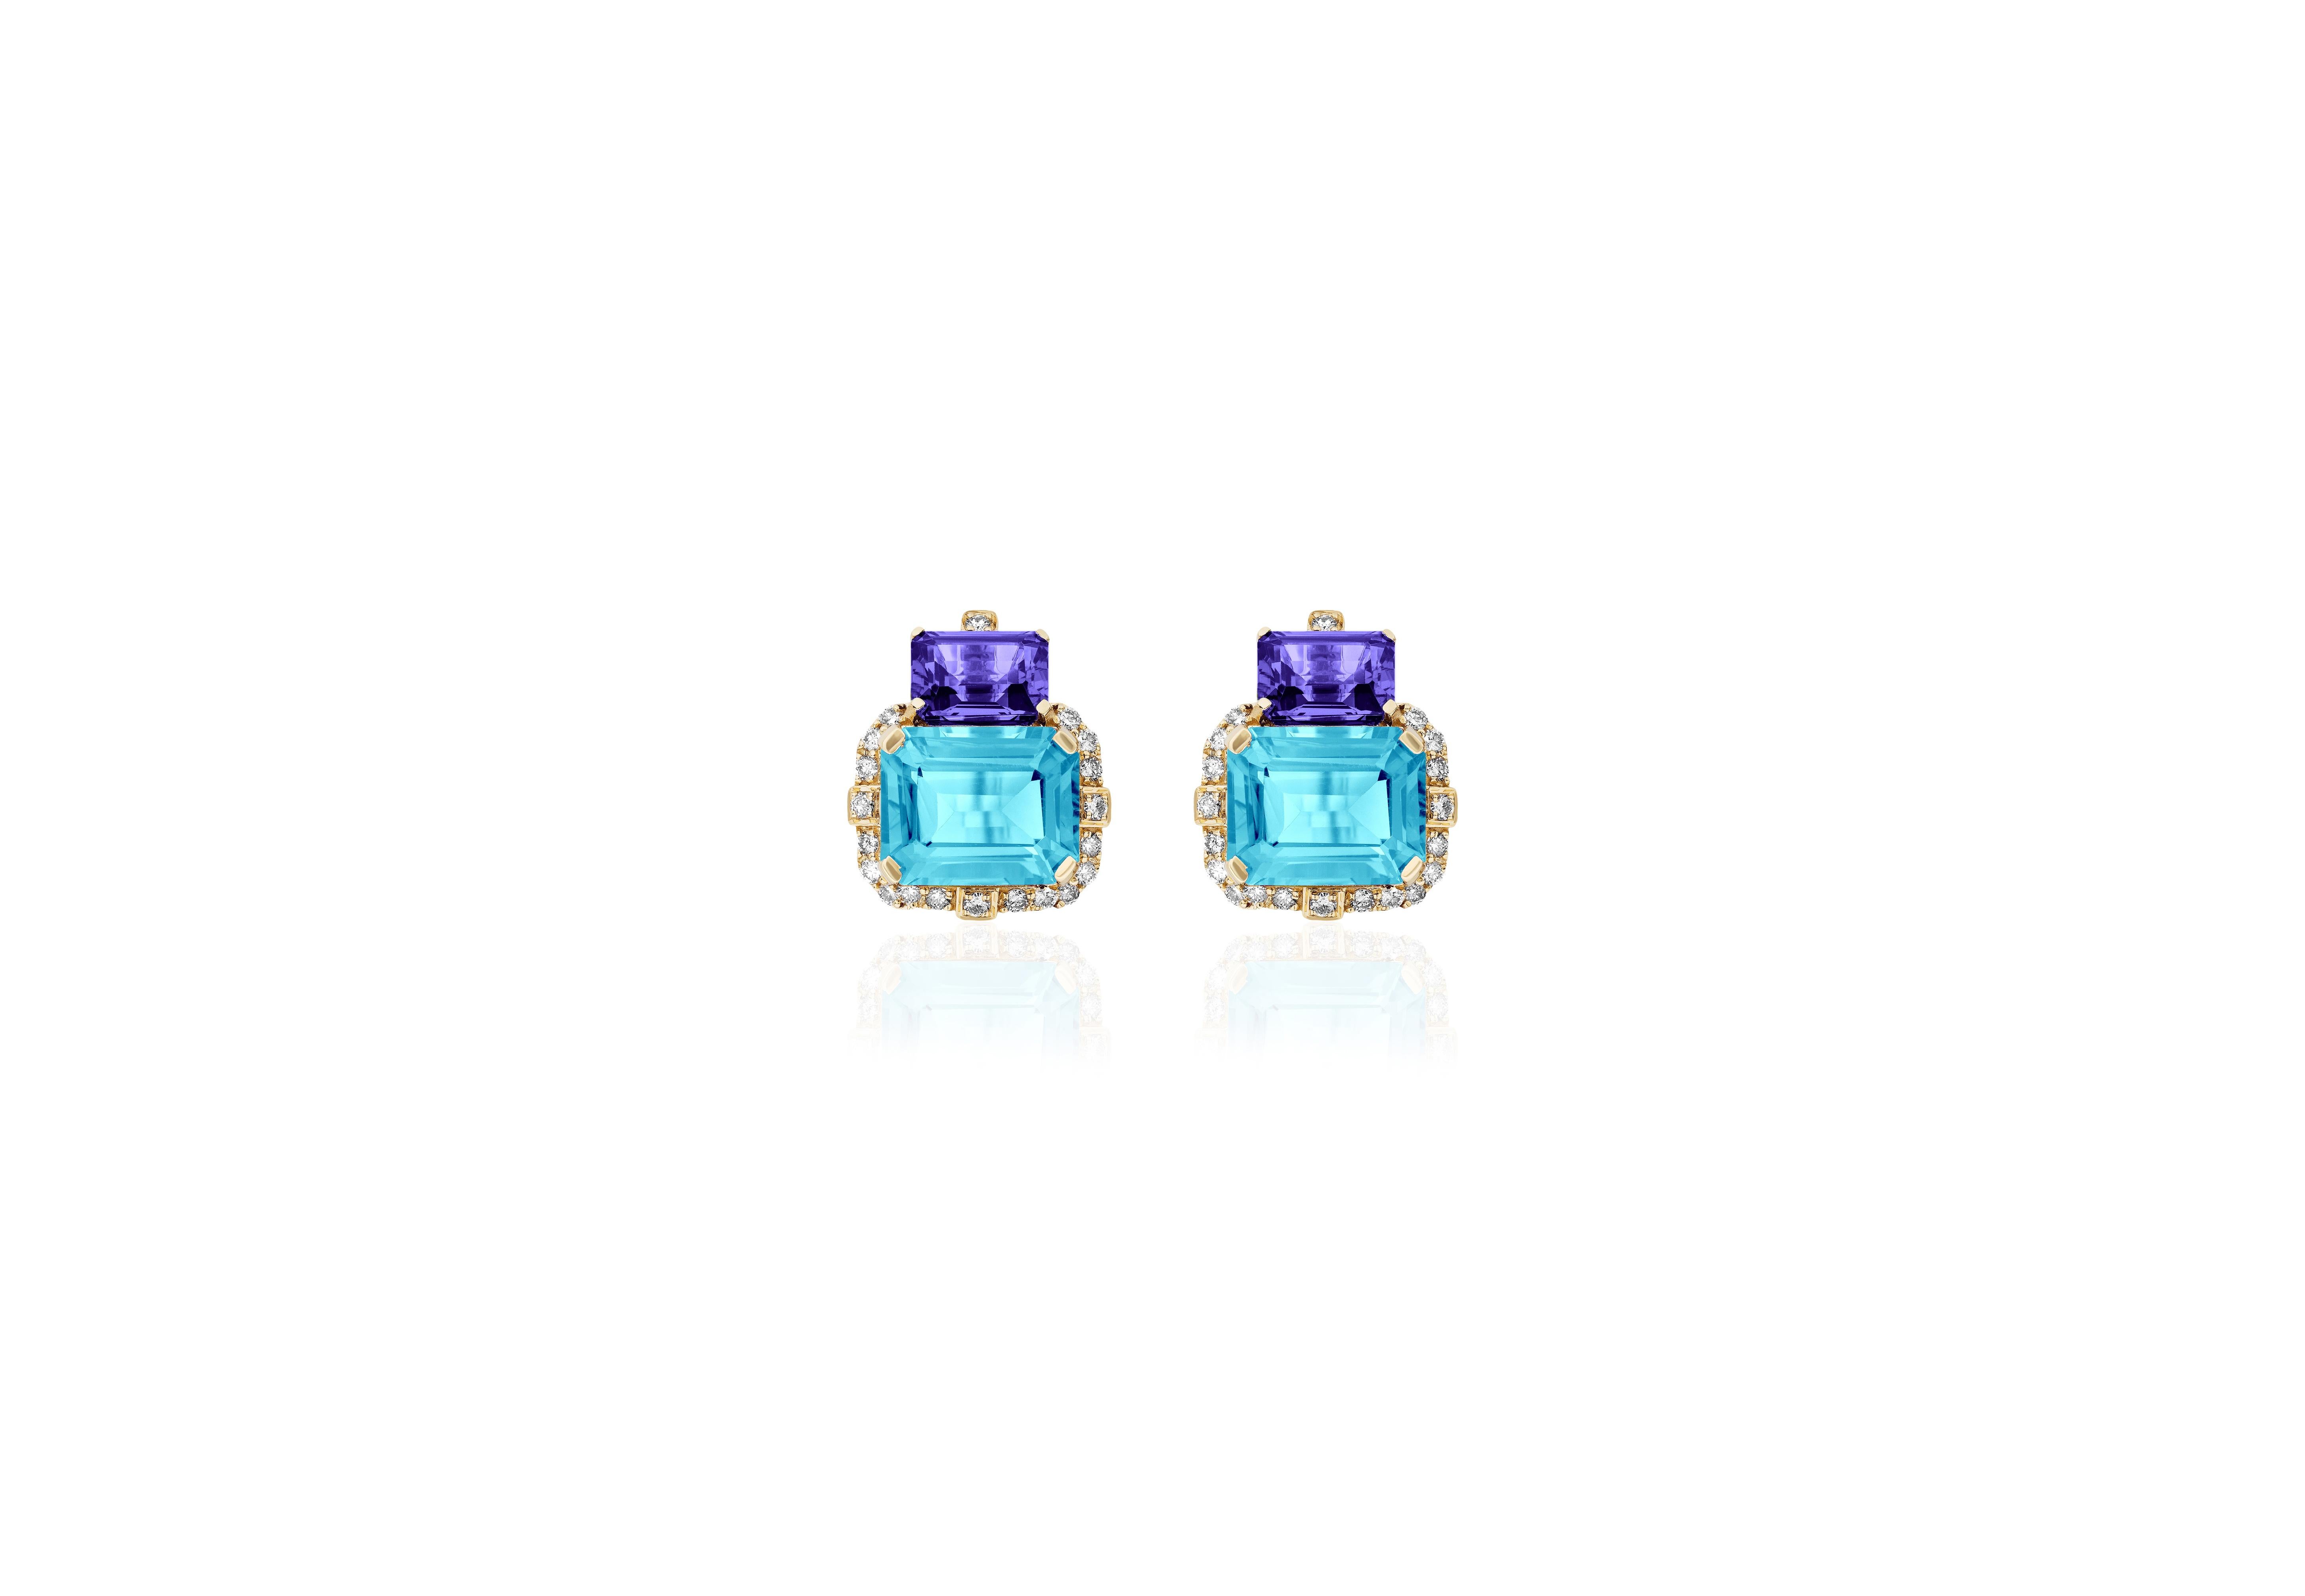 Introducing the captivating 2 Stone Tanzanite and Blue Topaz Emerald Cut Earrings with Diamonds in 18K Yellow Gold, a remarkable creation from the exquisite 'Gossip' Collection. Crafted with meticulous attention to detail, these earrings embody